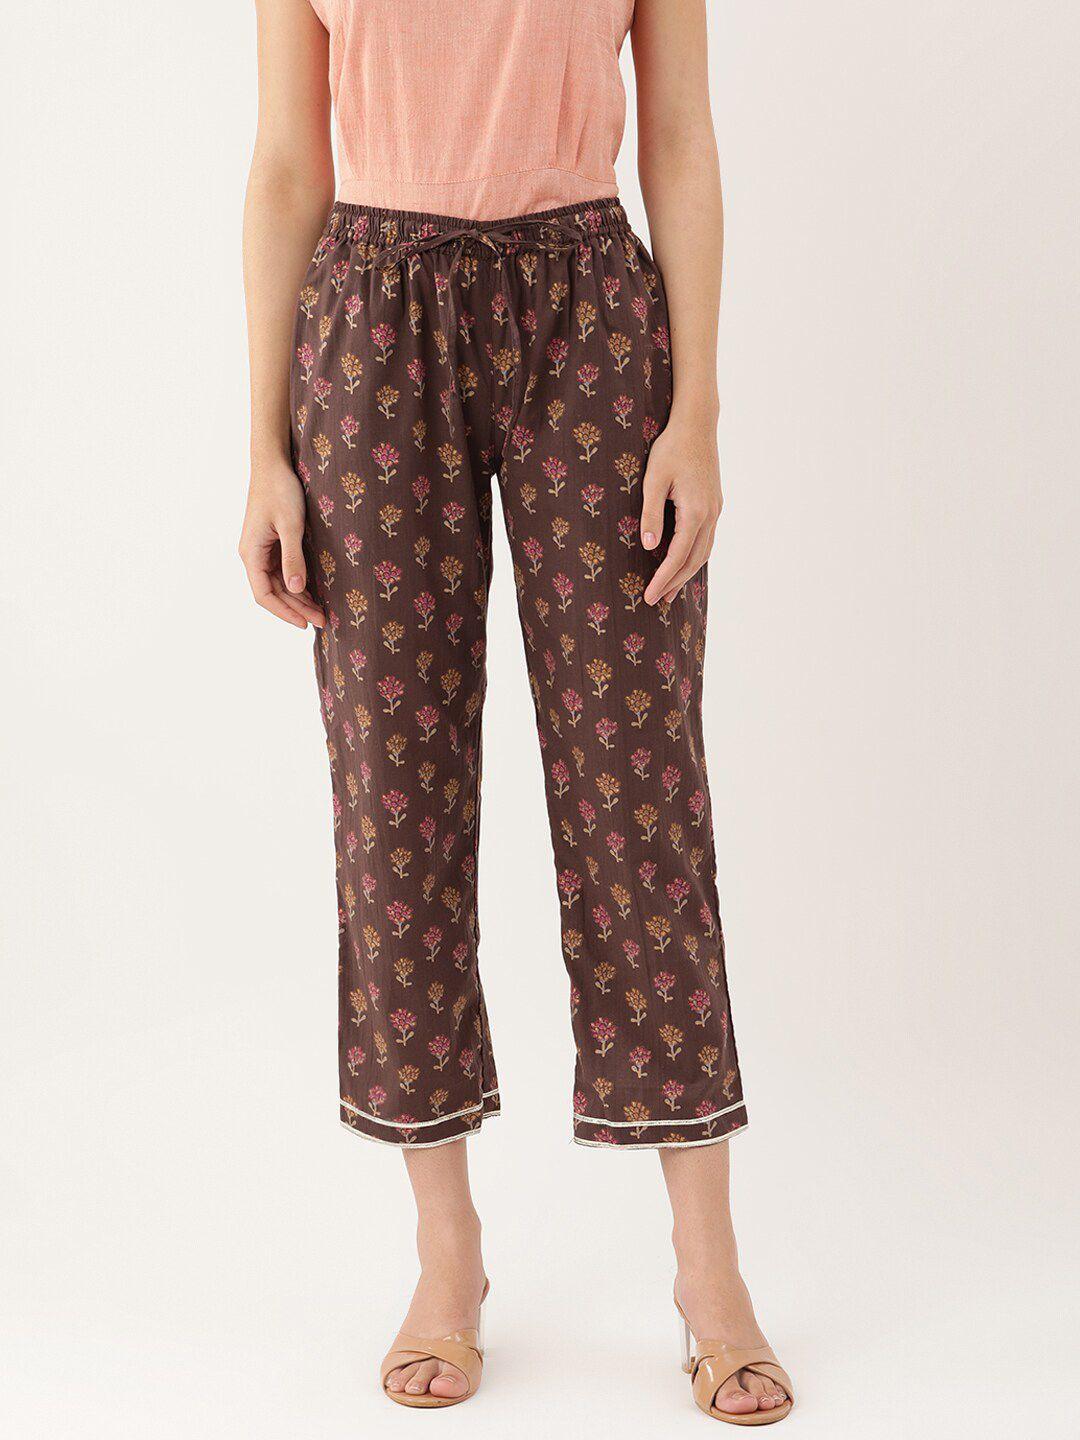 lokatita women floral printed mid-rise straight fit cotton trousers